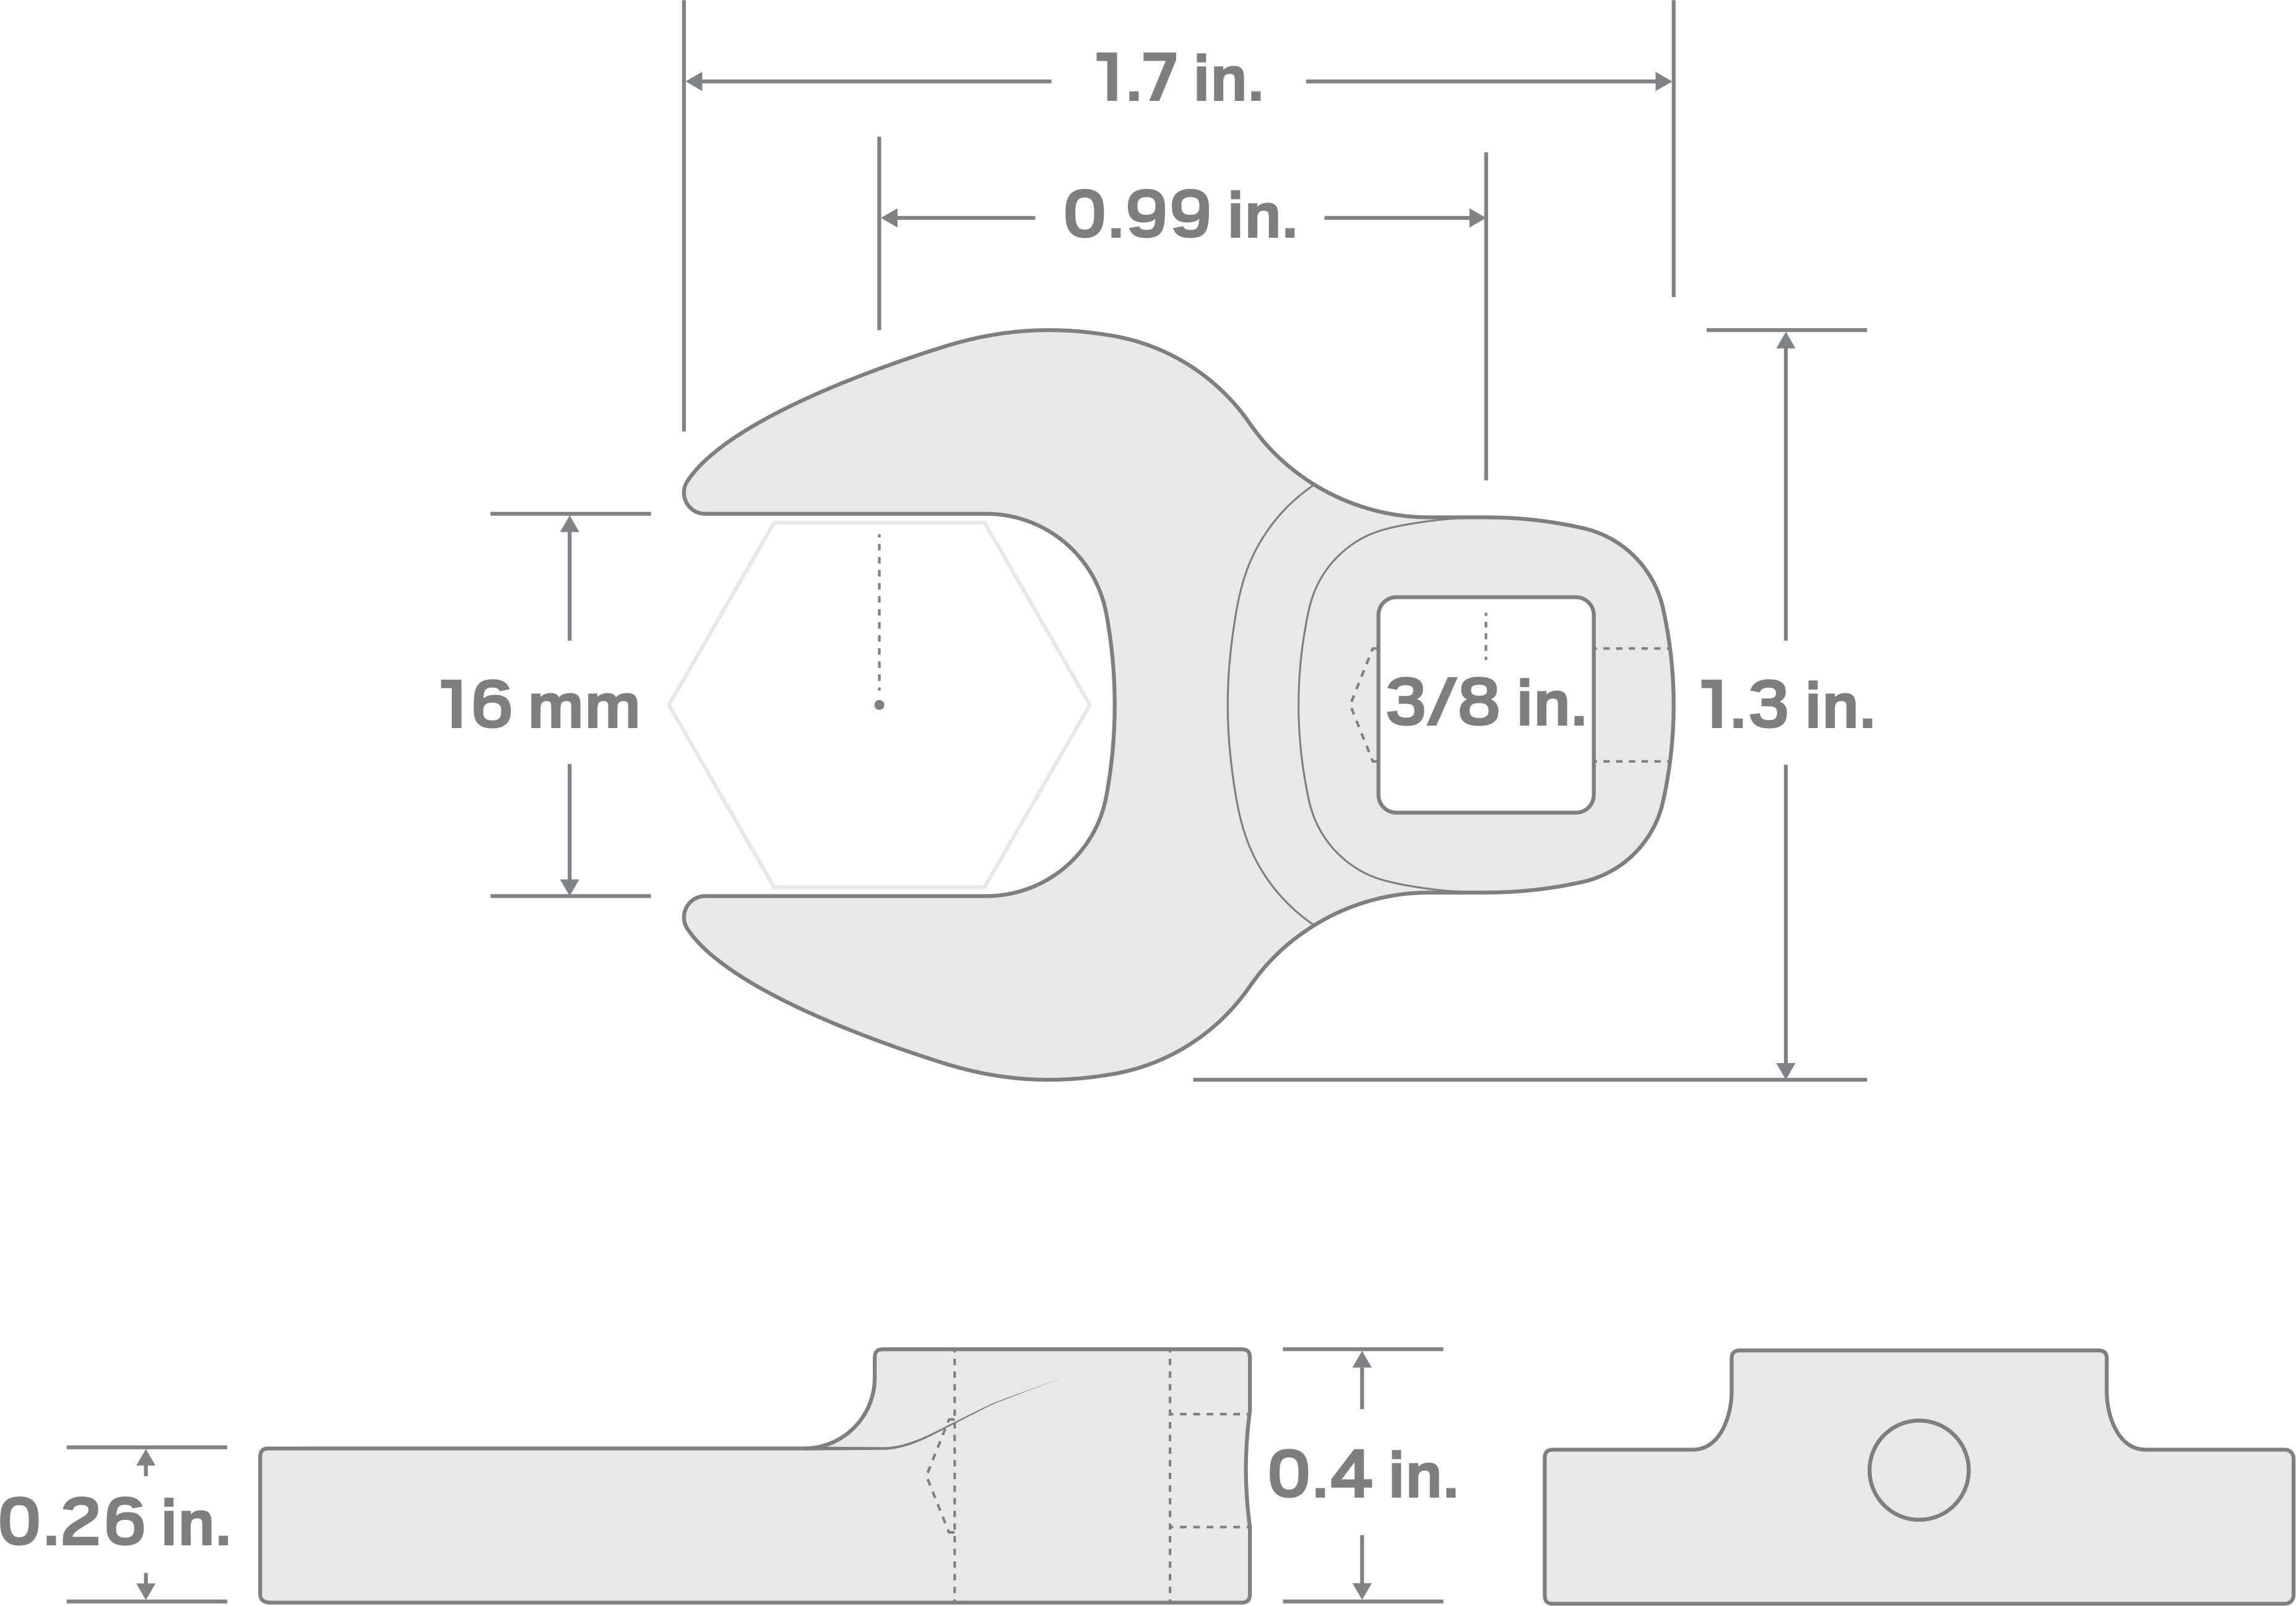 Specs for 3/8 Inch Drive x 16 mm Crowfoot Wrench